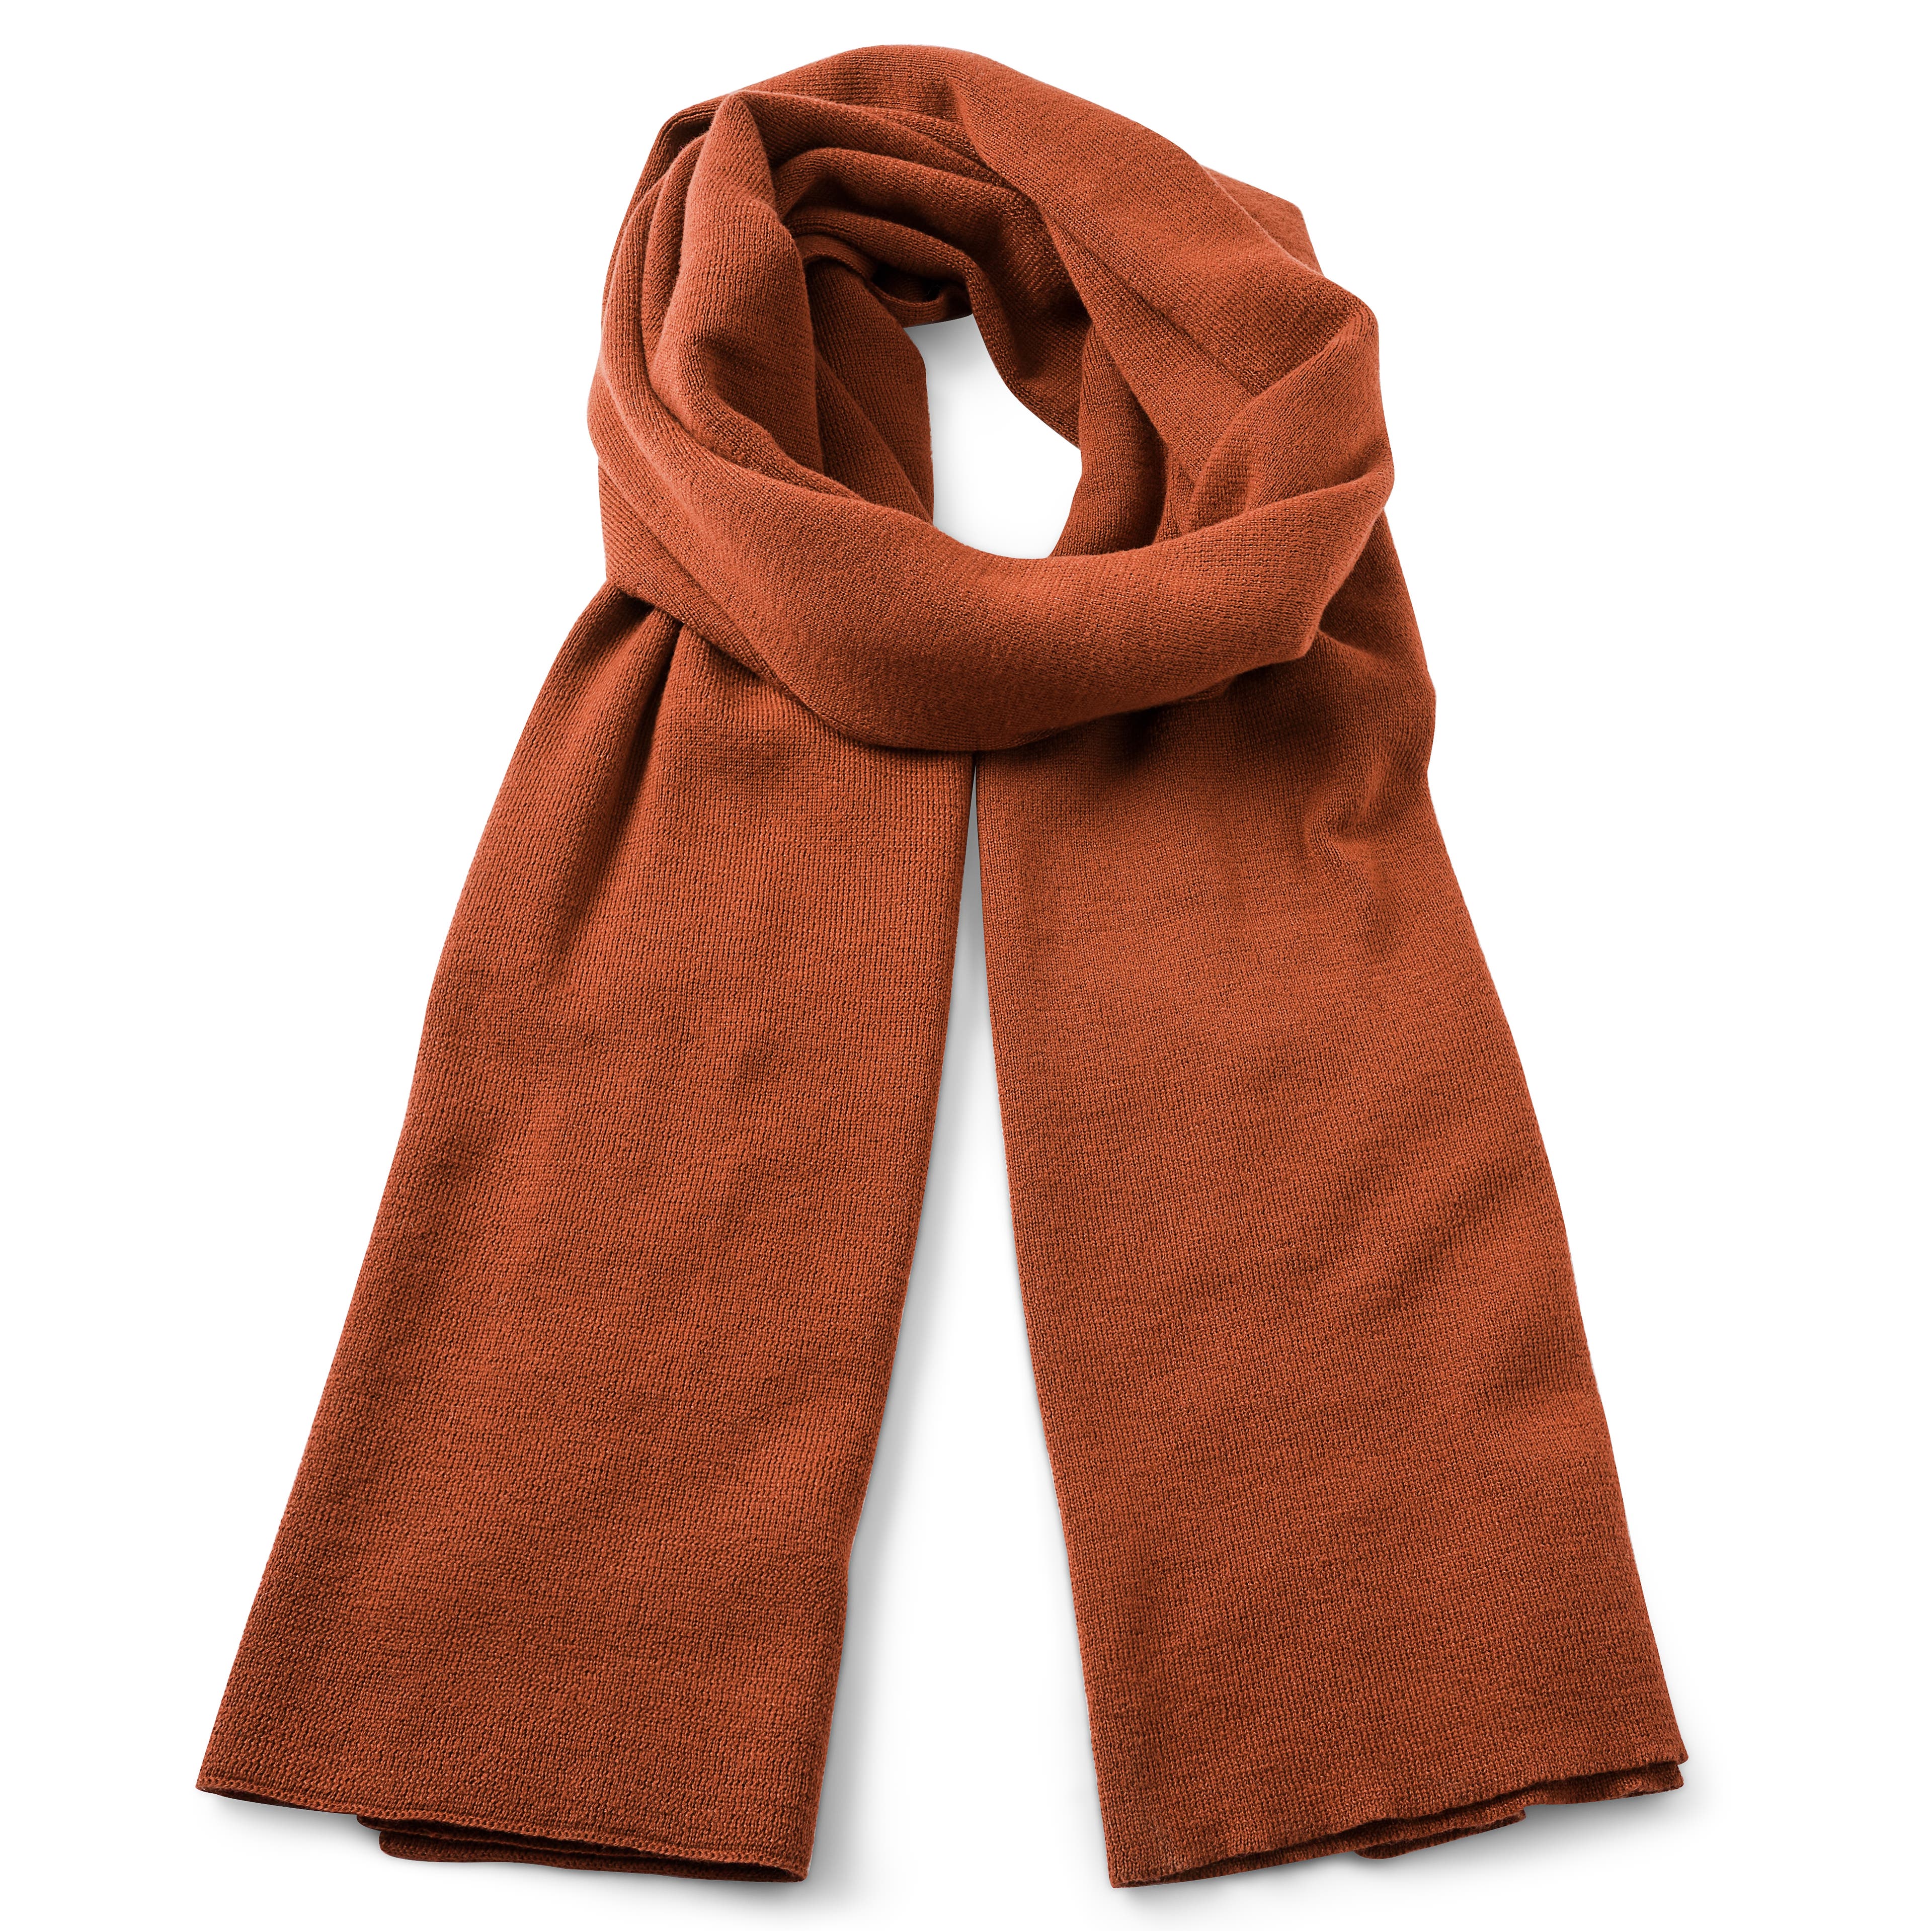 Pack of 9 Plain Cotton Scarves 27 in by 27 in Head Scarf (Orange) 